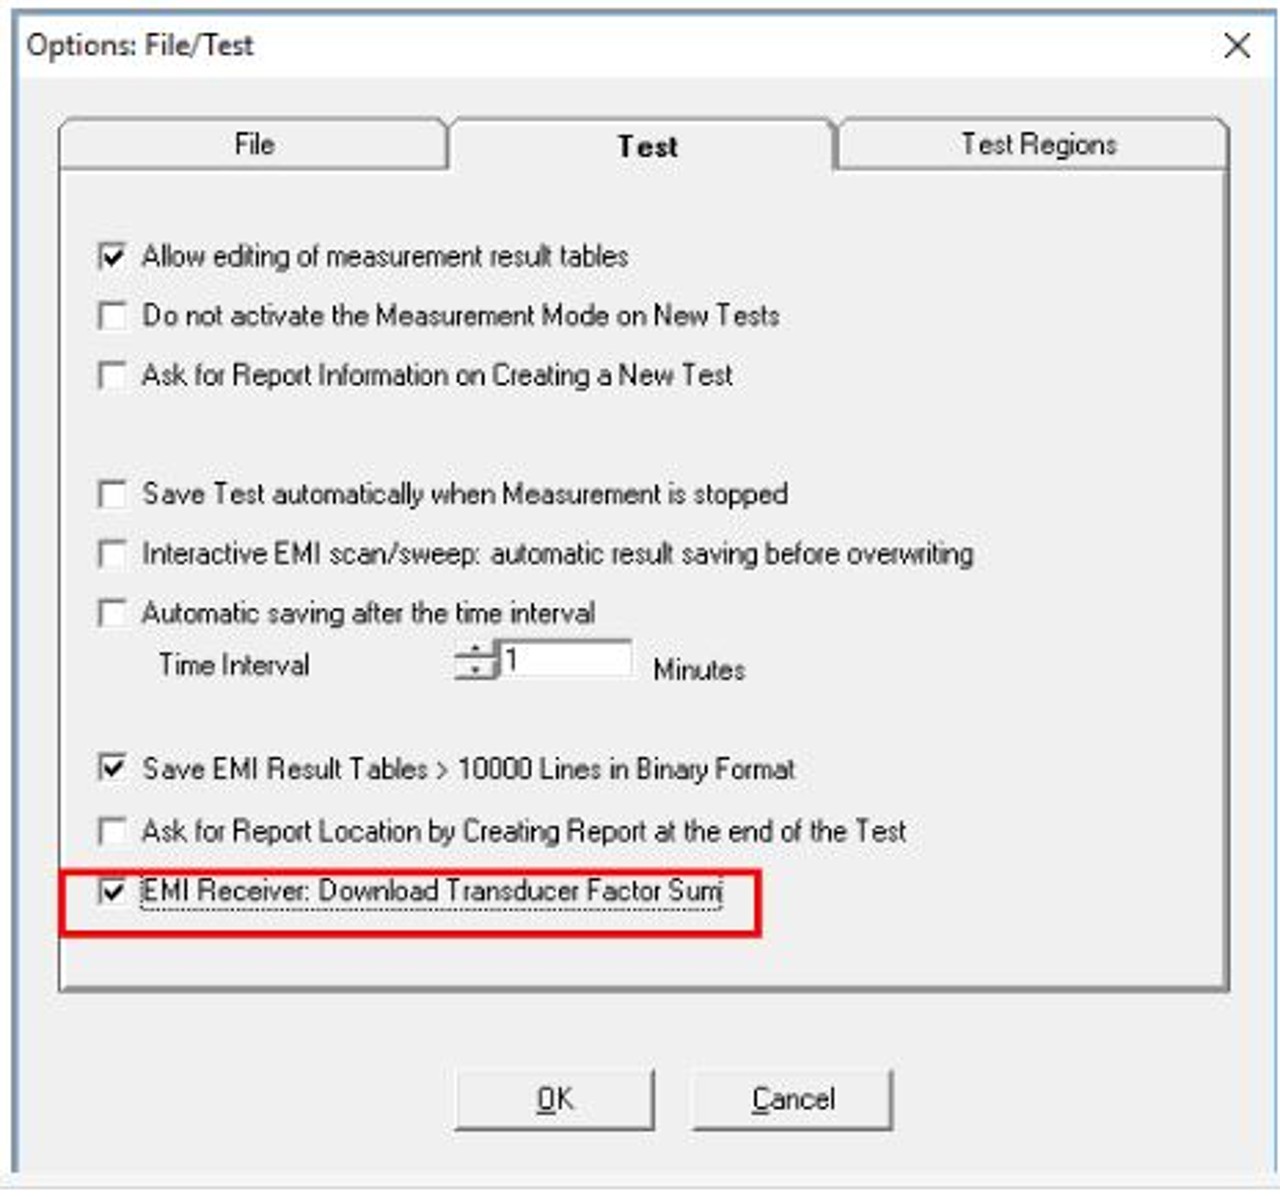 Download Transducer Factor to Test Receiver